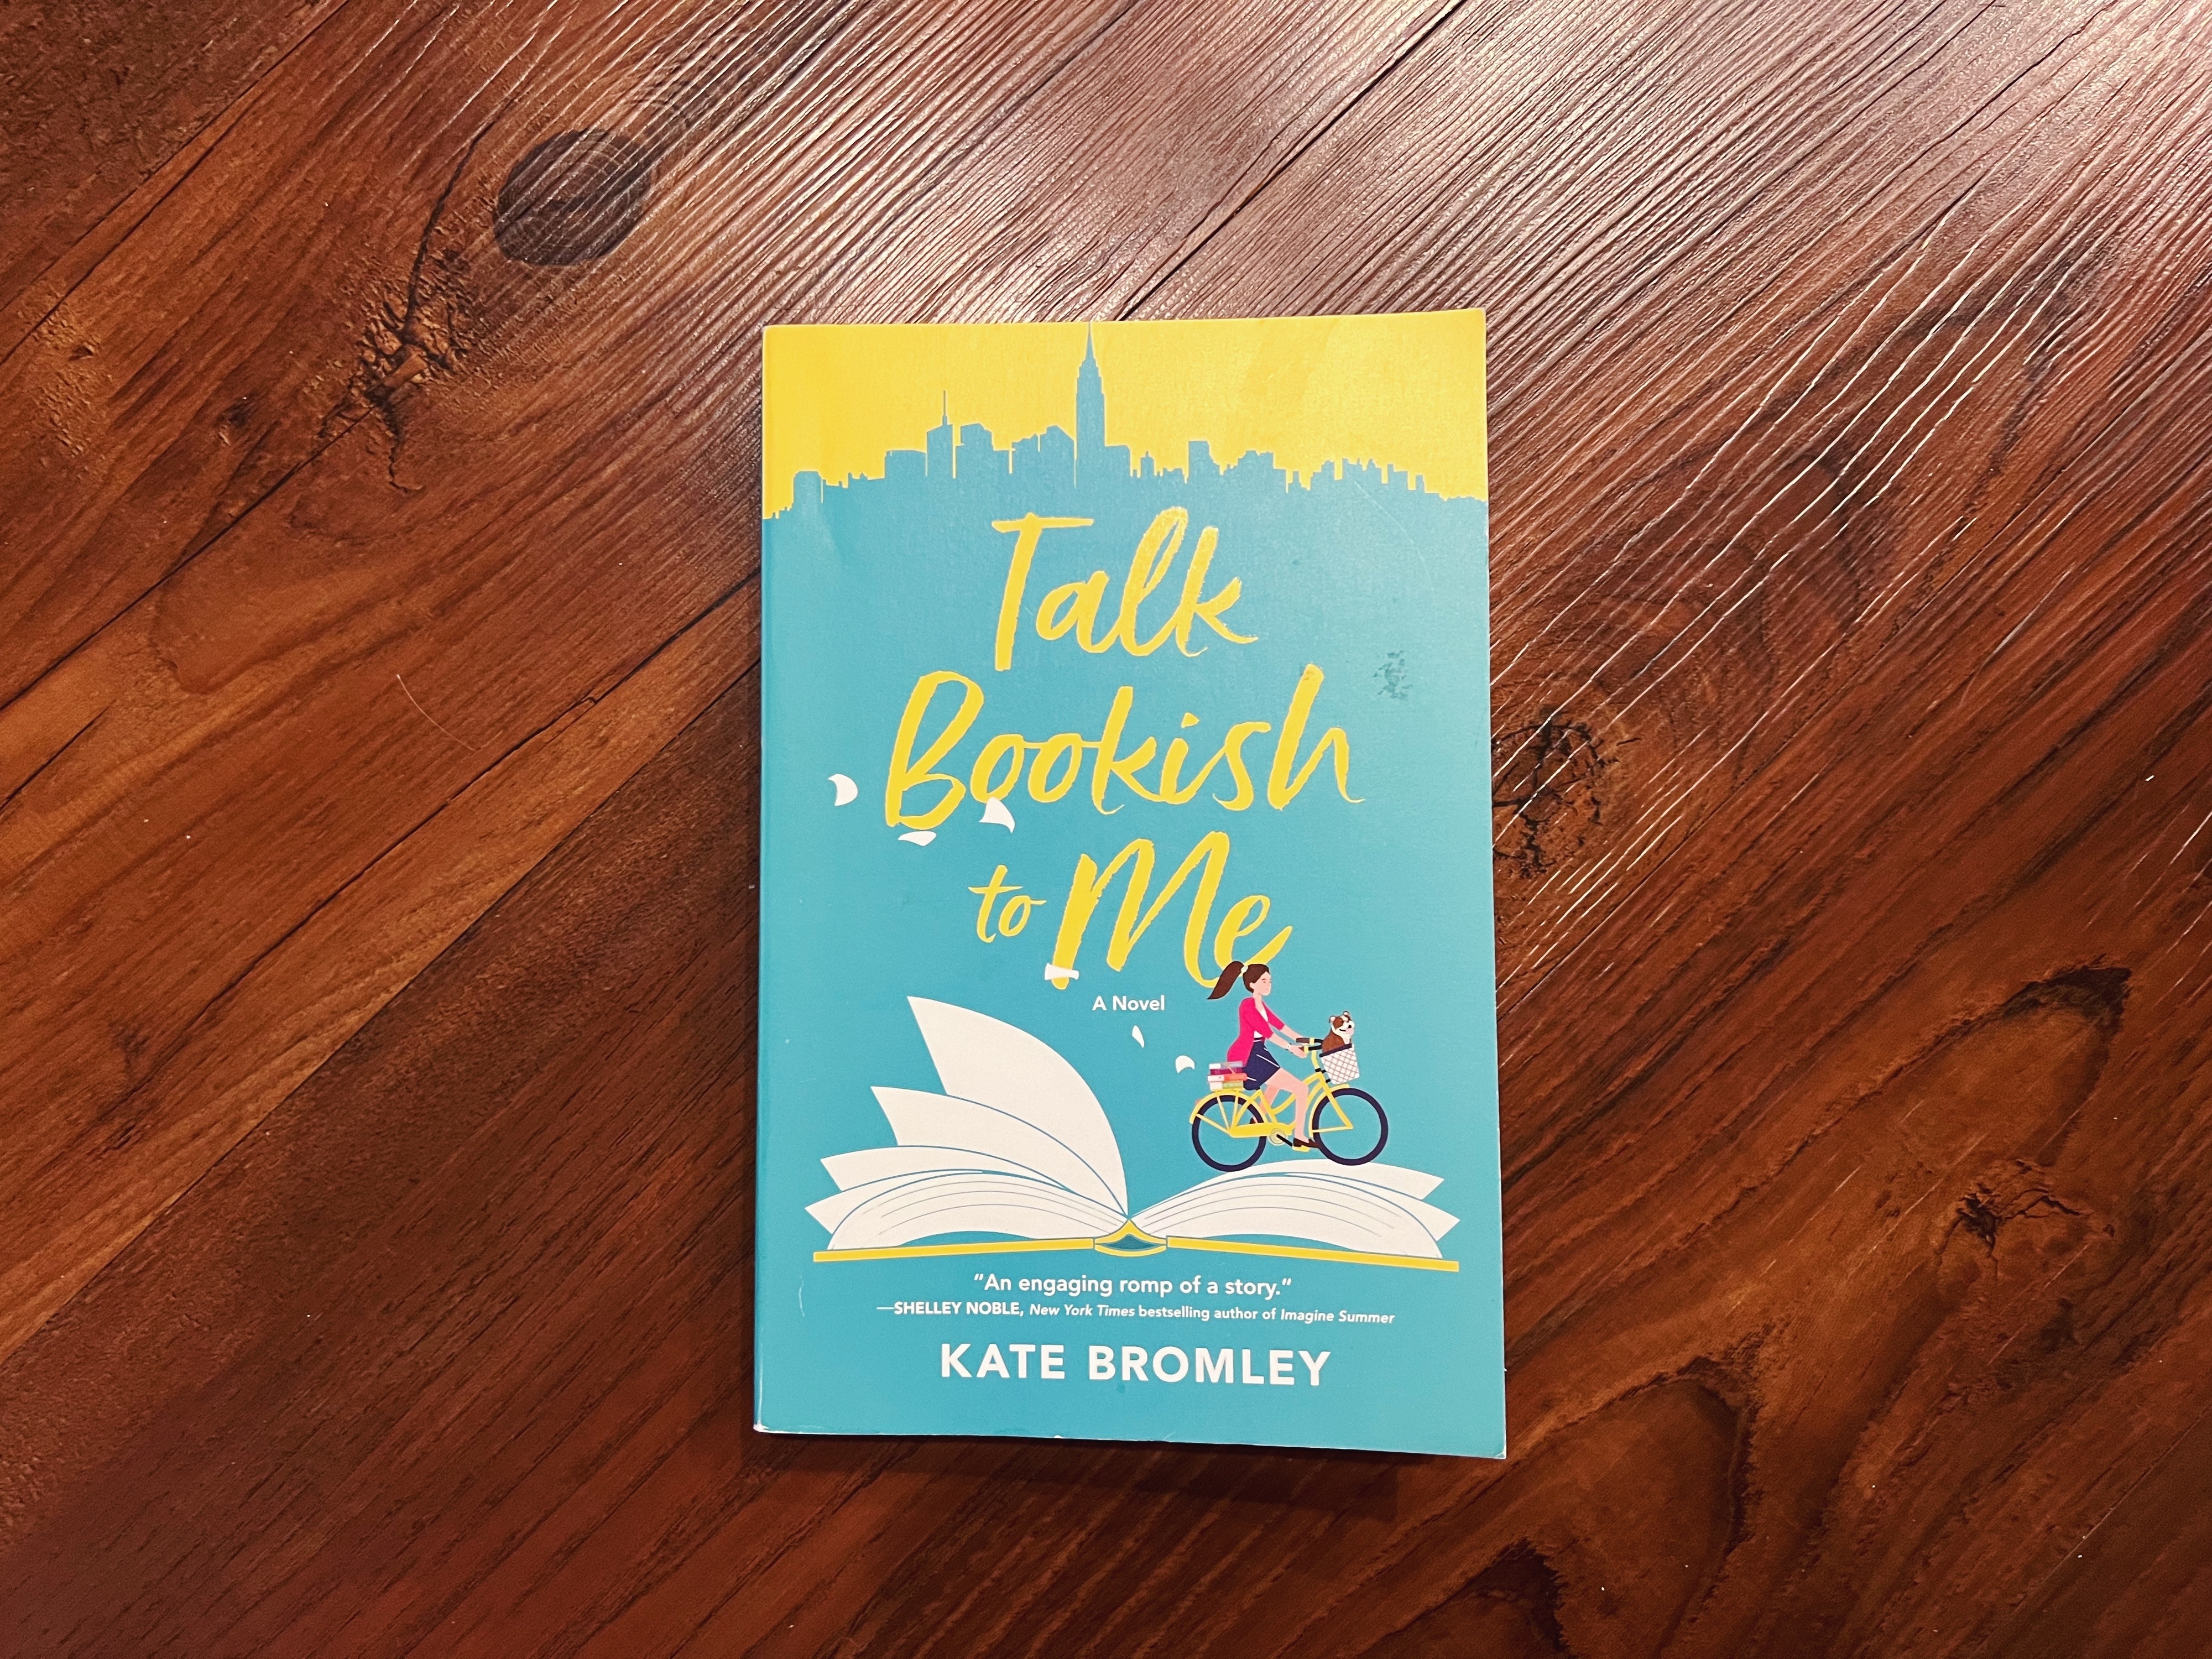 Book &quot;Talk Bookish to Me&quot; by Kate Bromley on a wooden surface